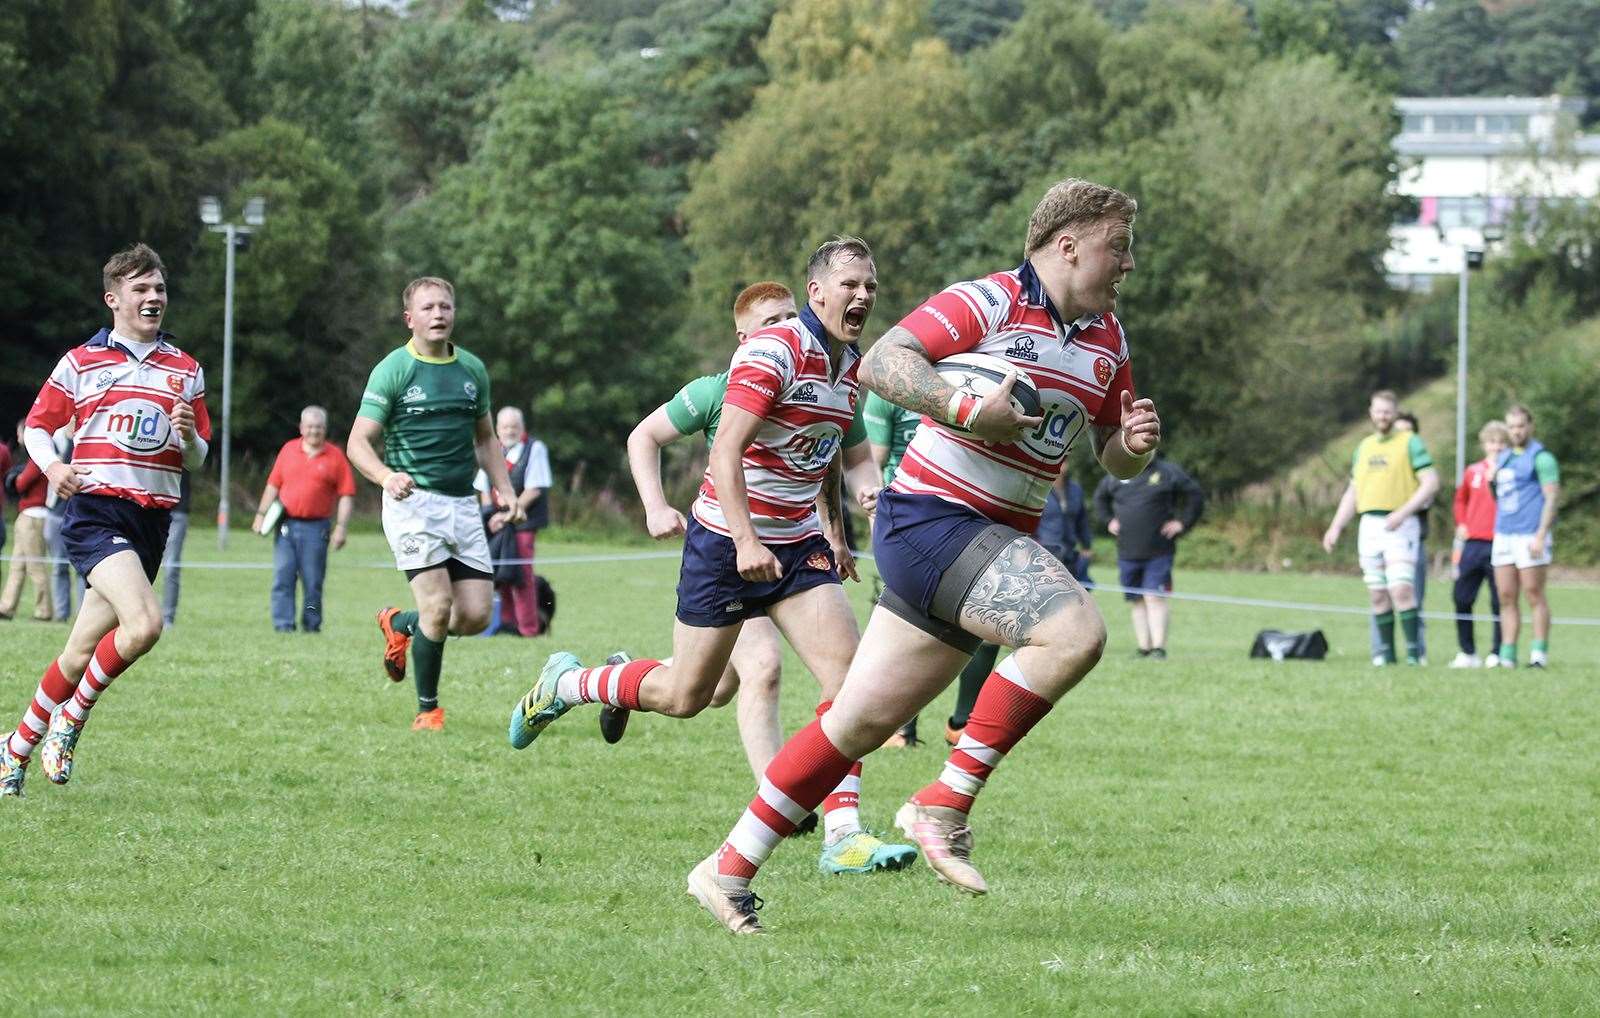 Lewis Scott runs in score a try. In support are Lewis Hay and Cameron Ireland. Picture: John MacGregor